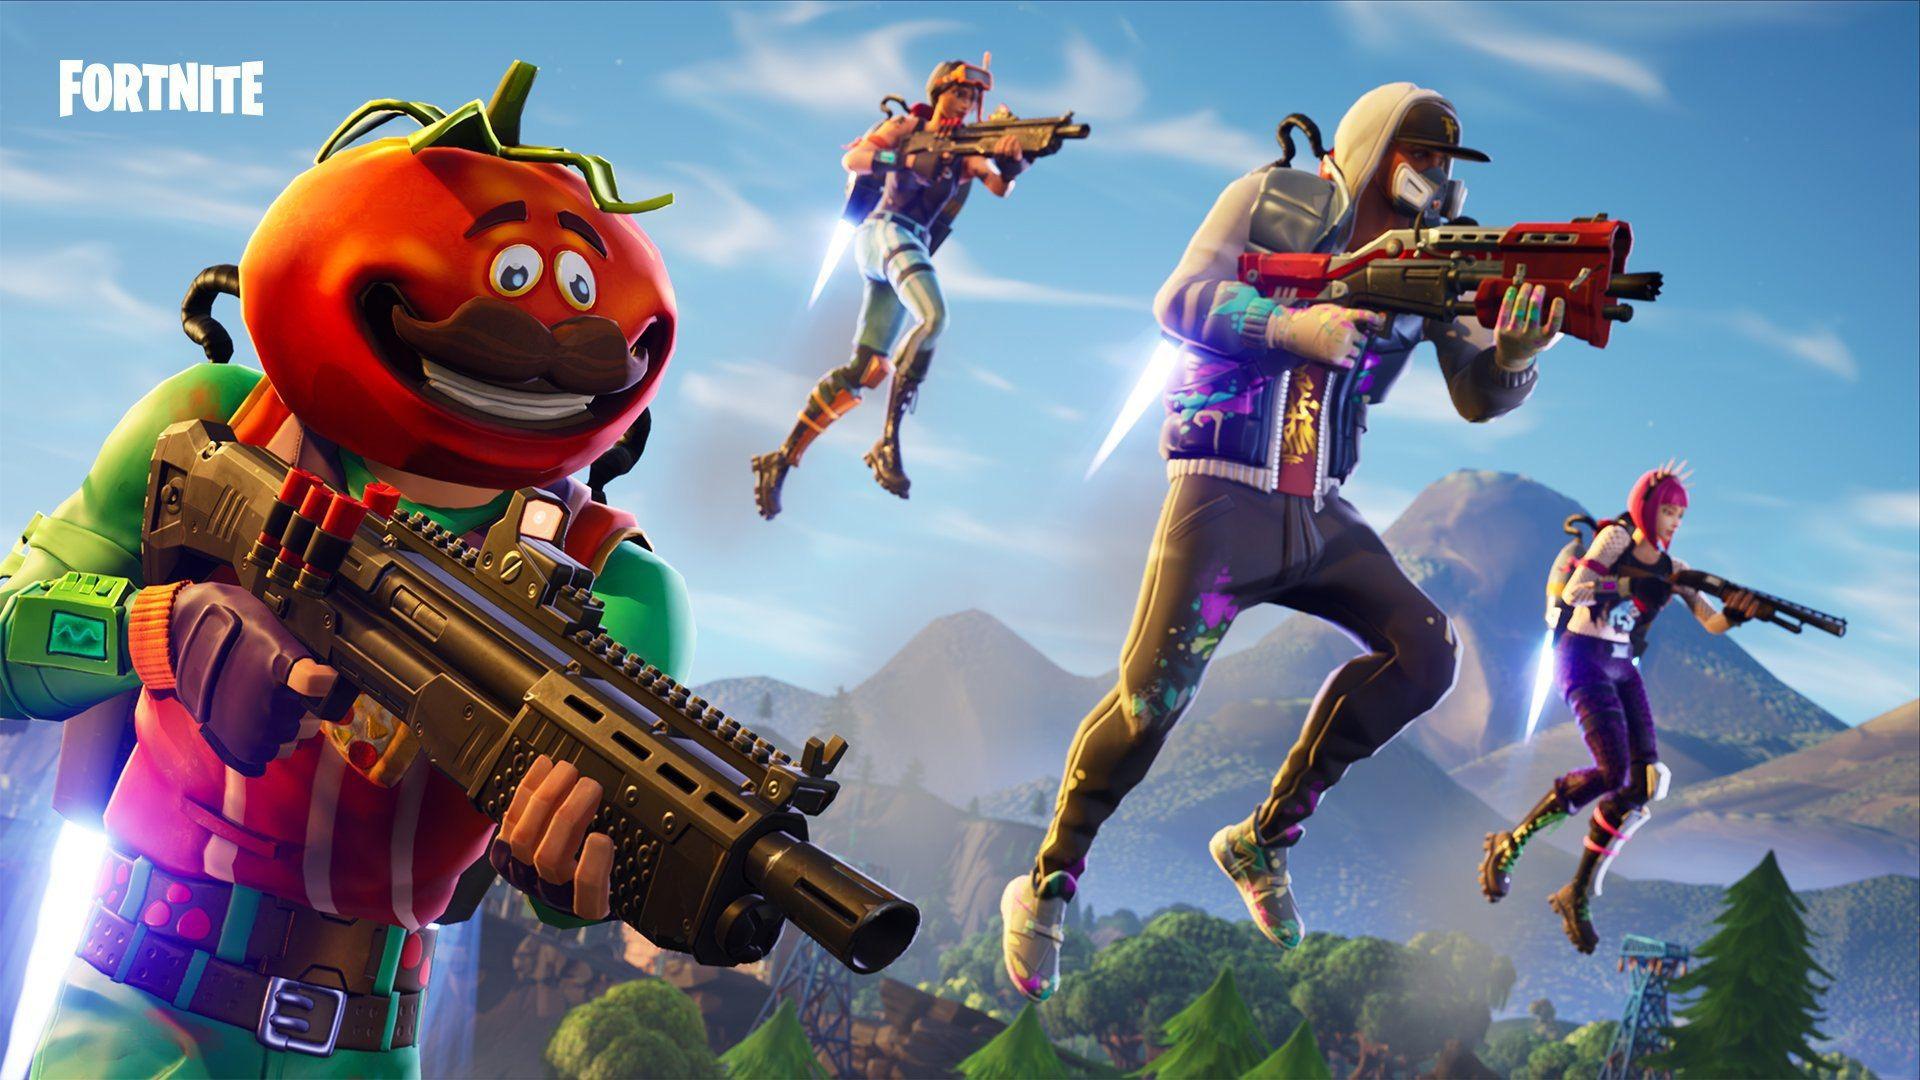 Fortnite was the most played Nintendo Switch game in 2018